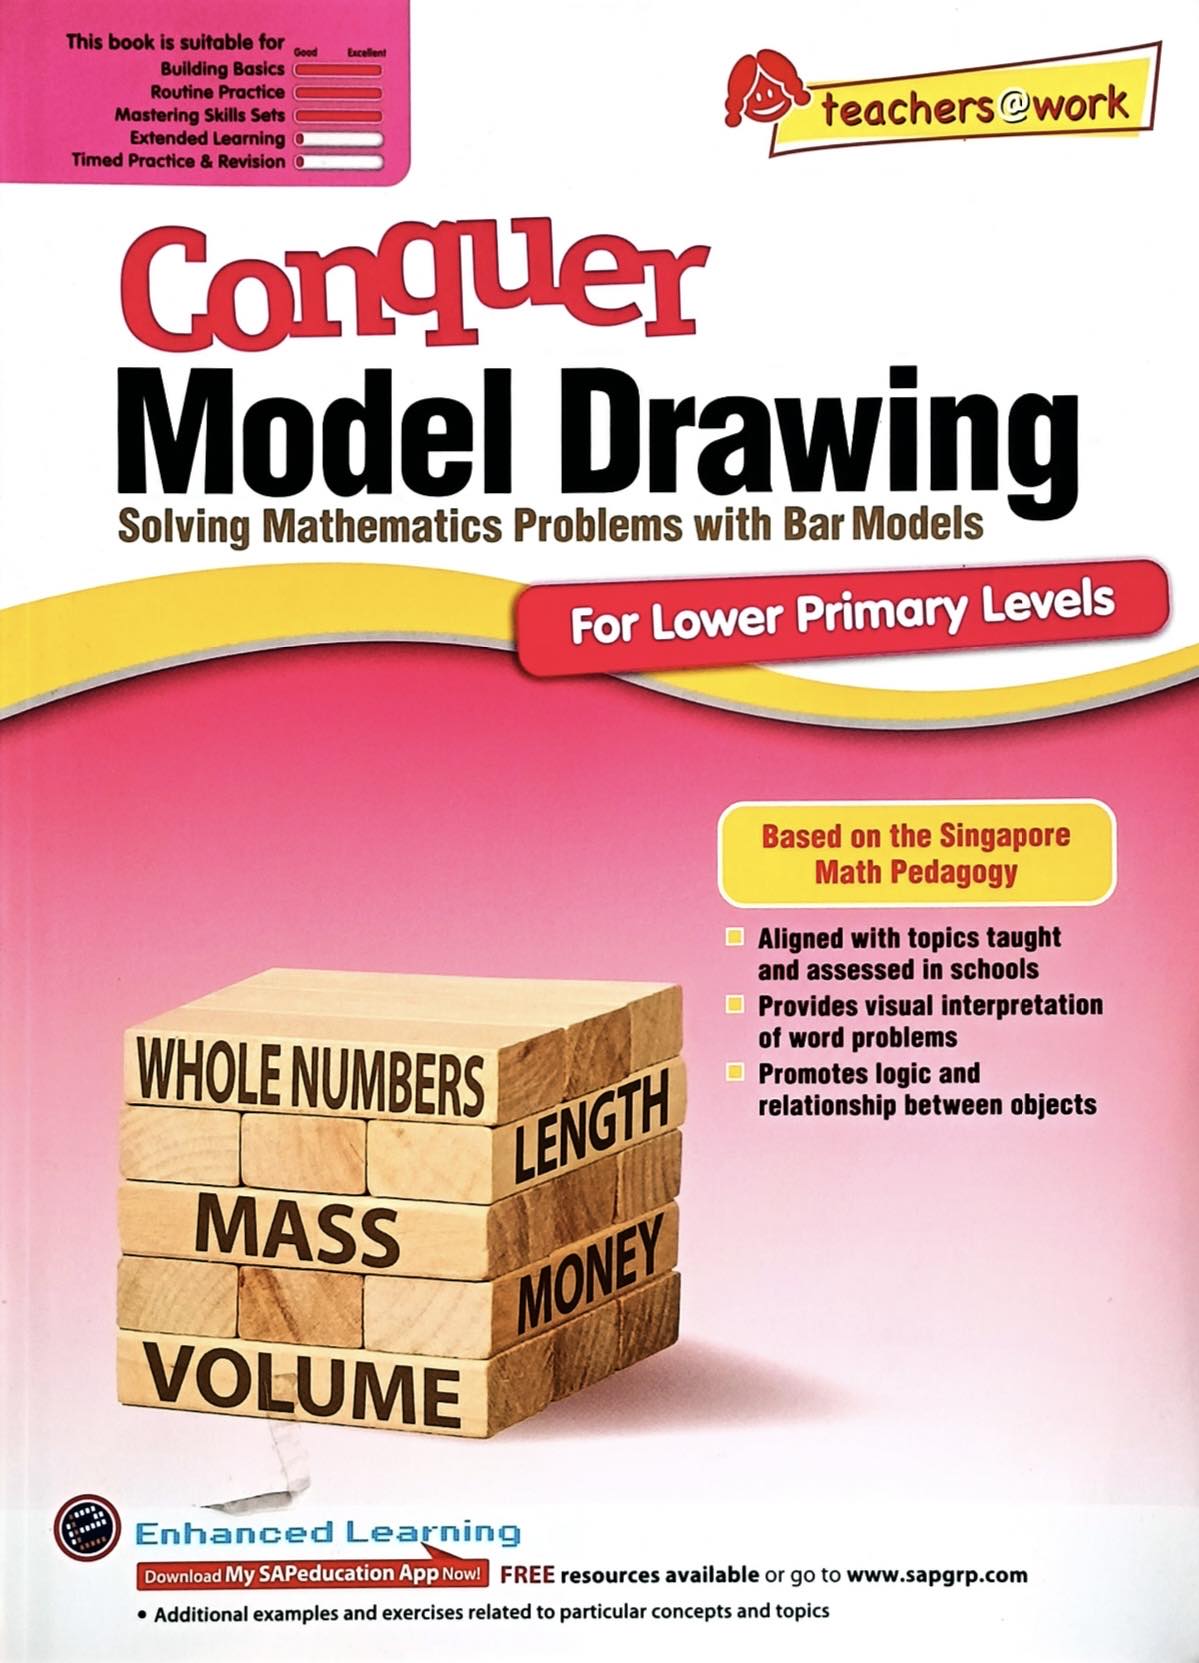 Conquer Model Drawing for Primary Levels